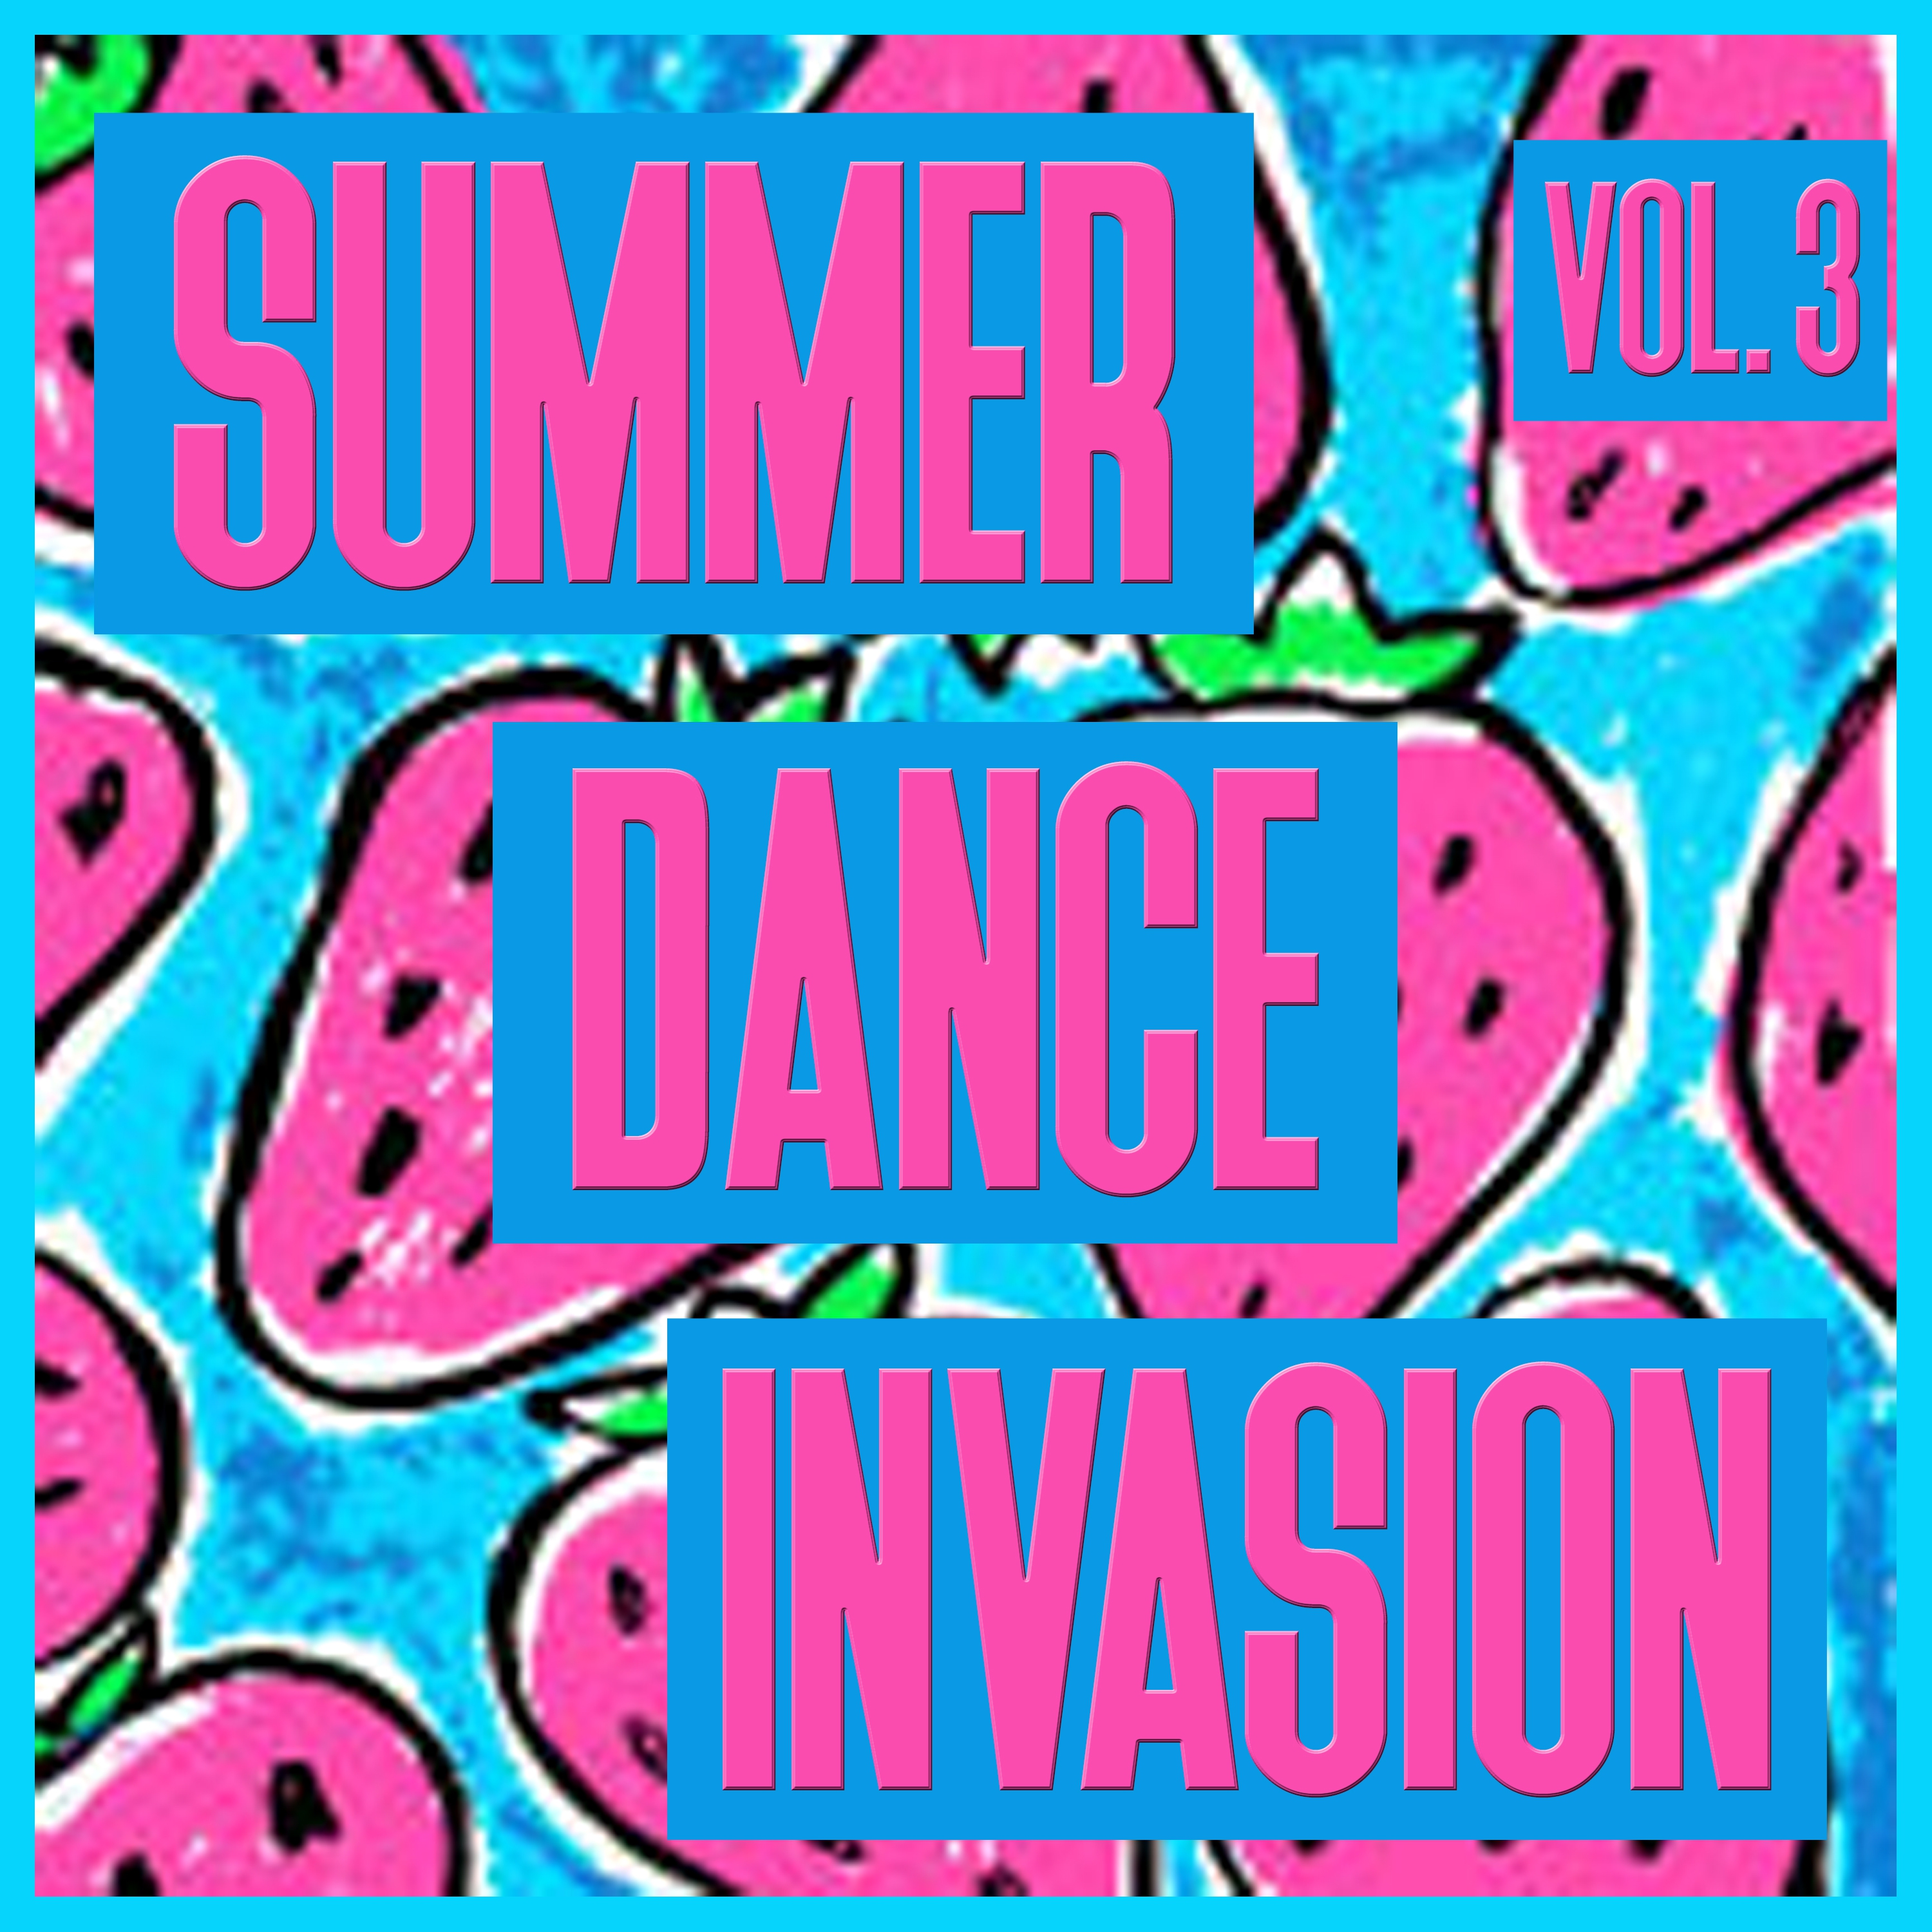 Summer Dance Invasion, Vol. 3 - Selection of Dance Music